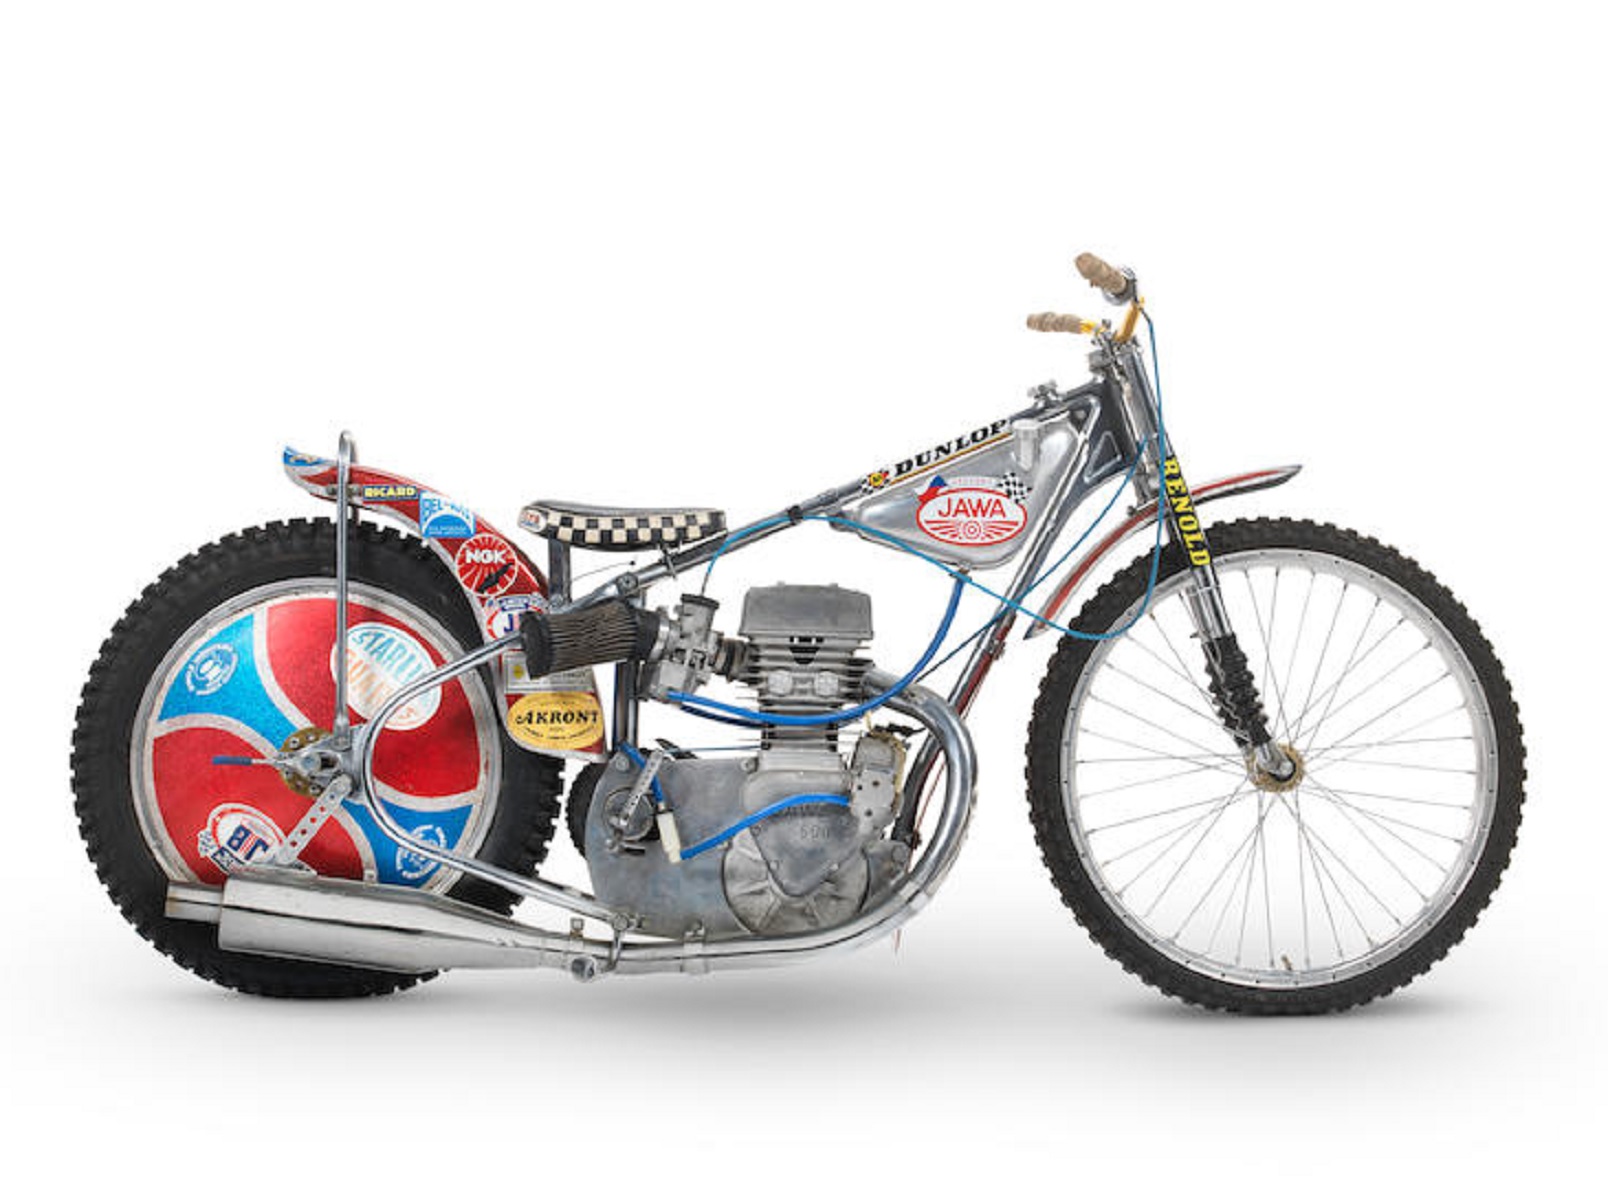 The silver 1977 Jawa 500 DOHC Speedway Racer raced by Ivan Mauger